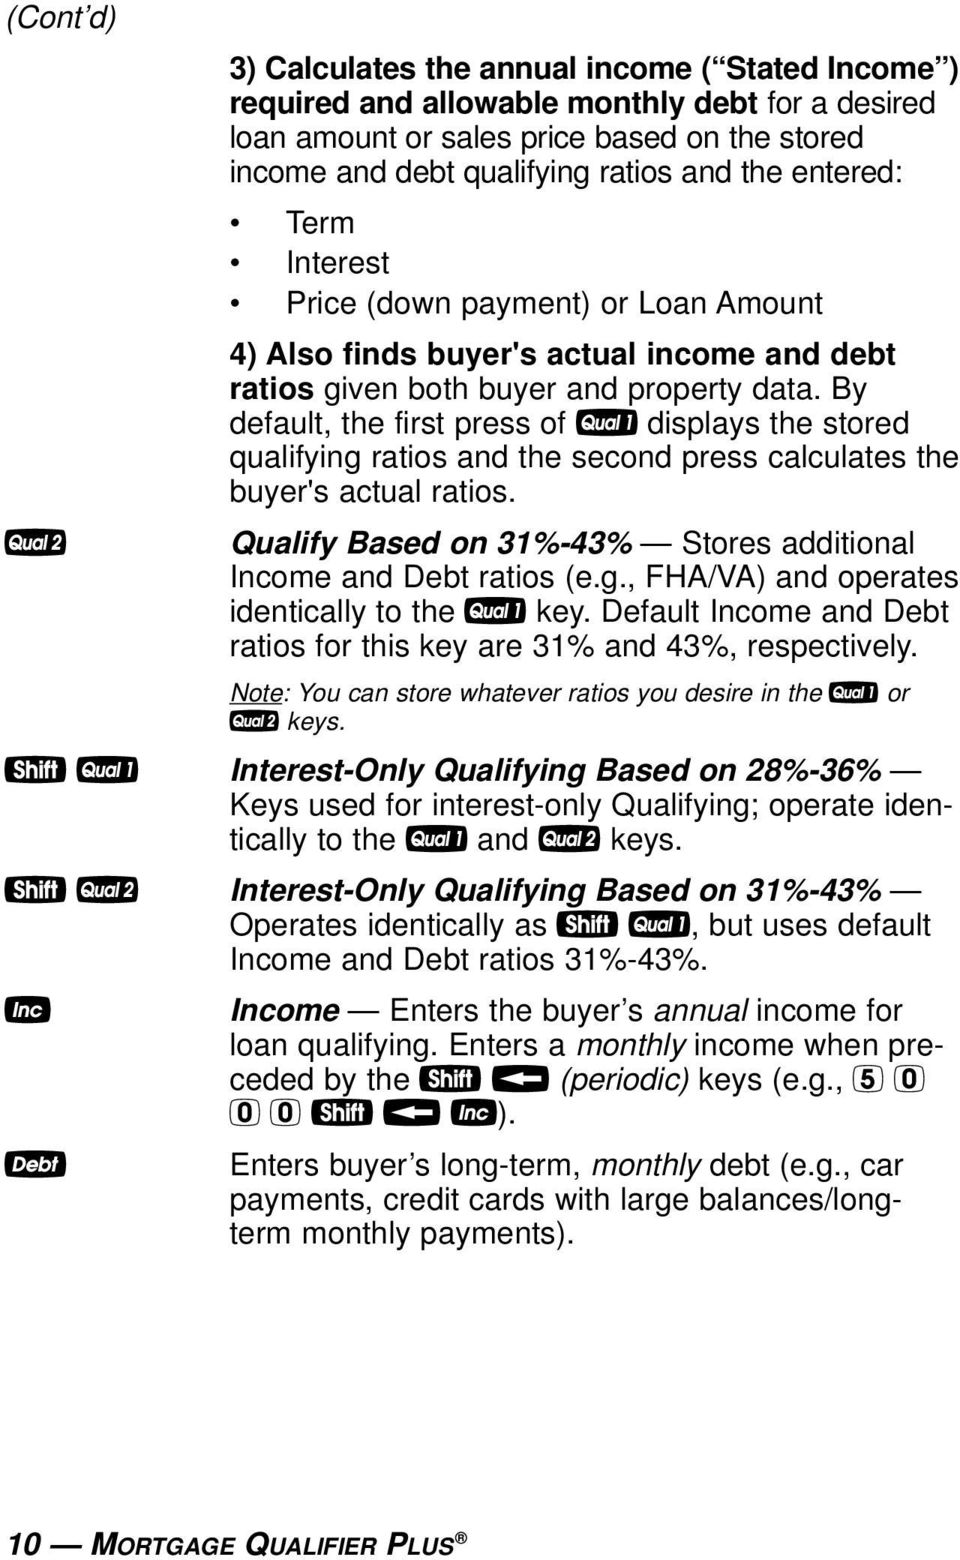 By default, the first press of q displays the stored qualifying ratios and the second press calculates the buyer's actual ratios. Qualify Based on 31%-43% Stores additional Income and Debt ratios (e.